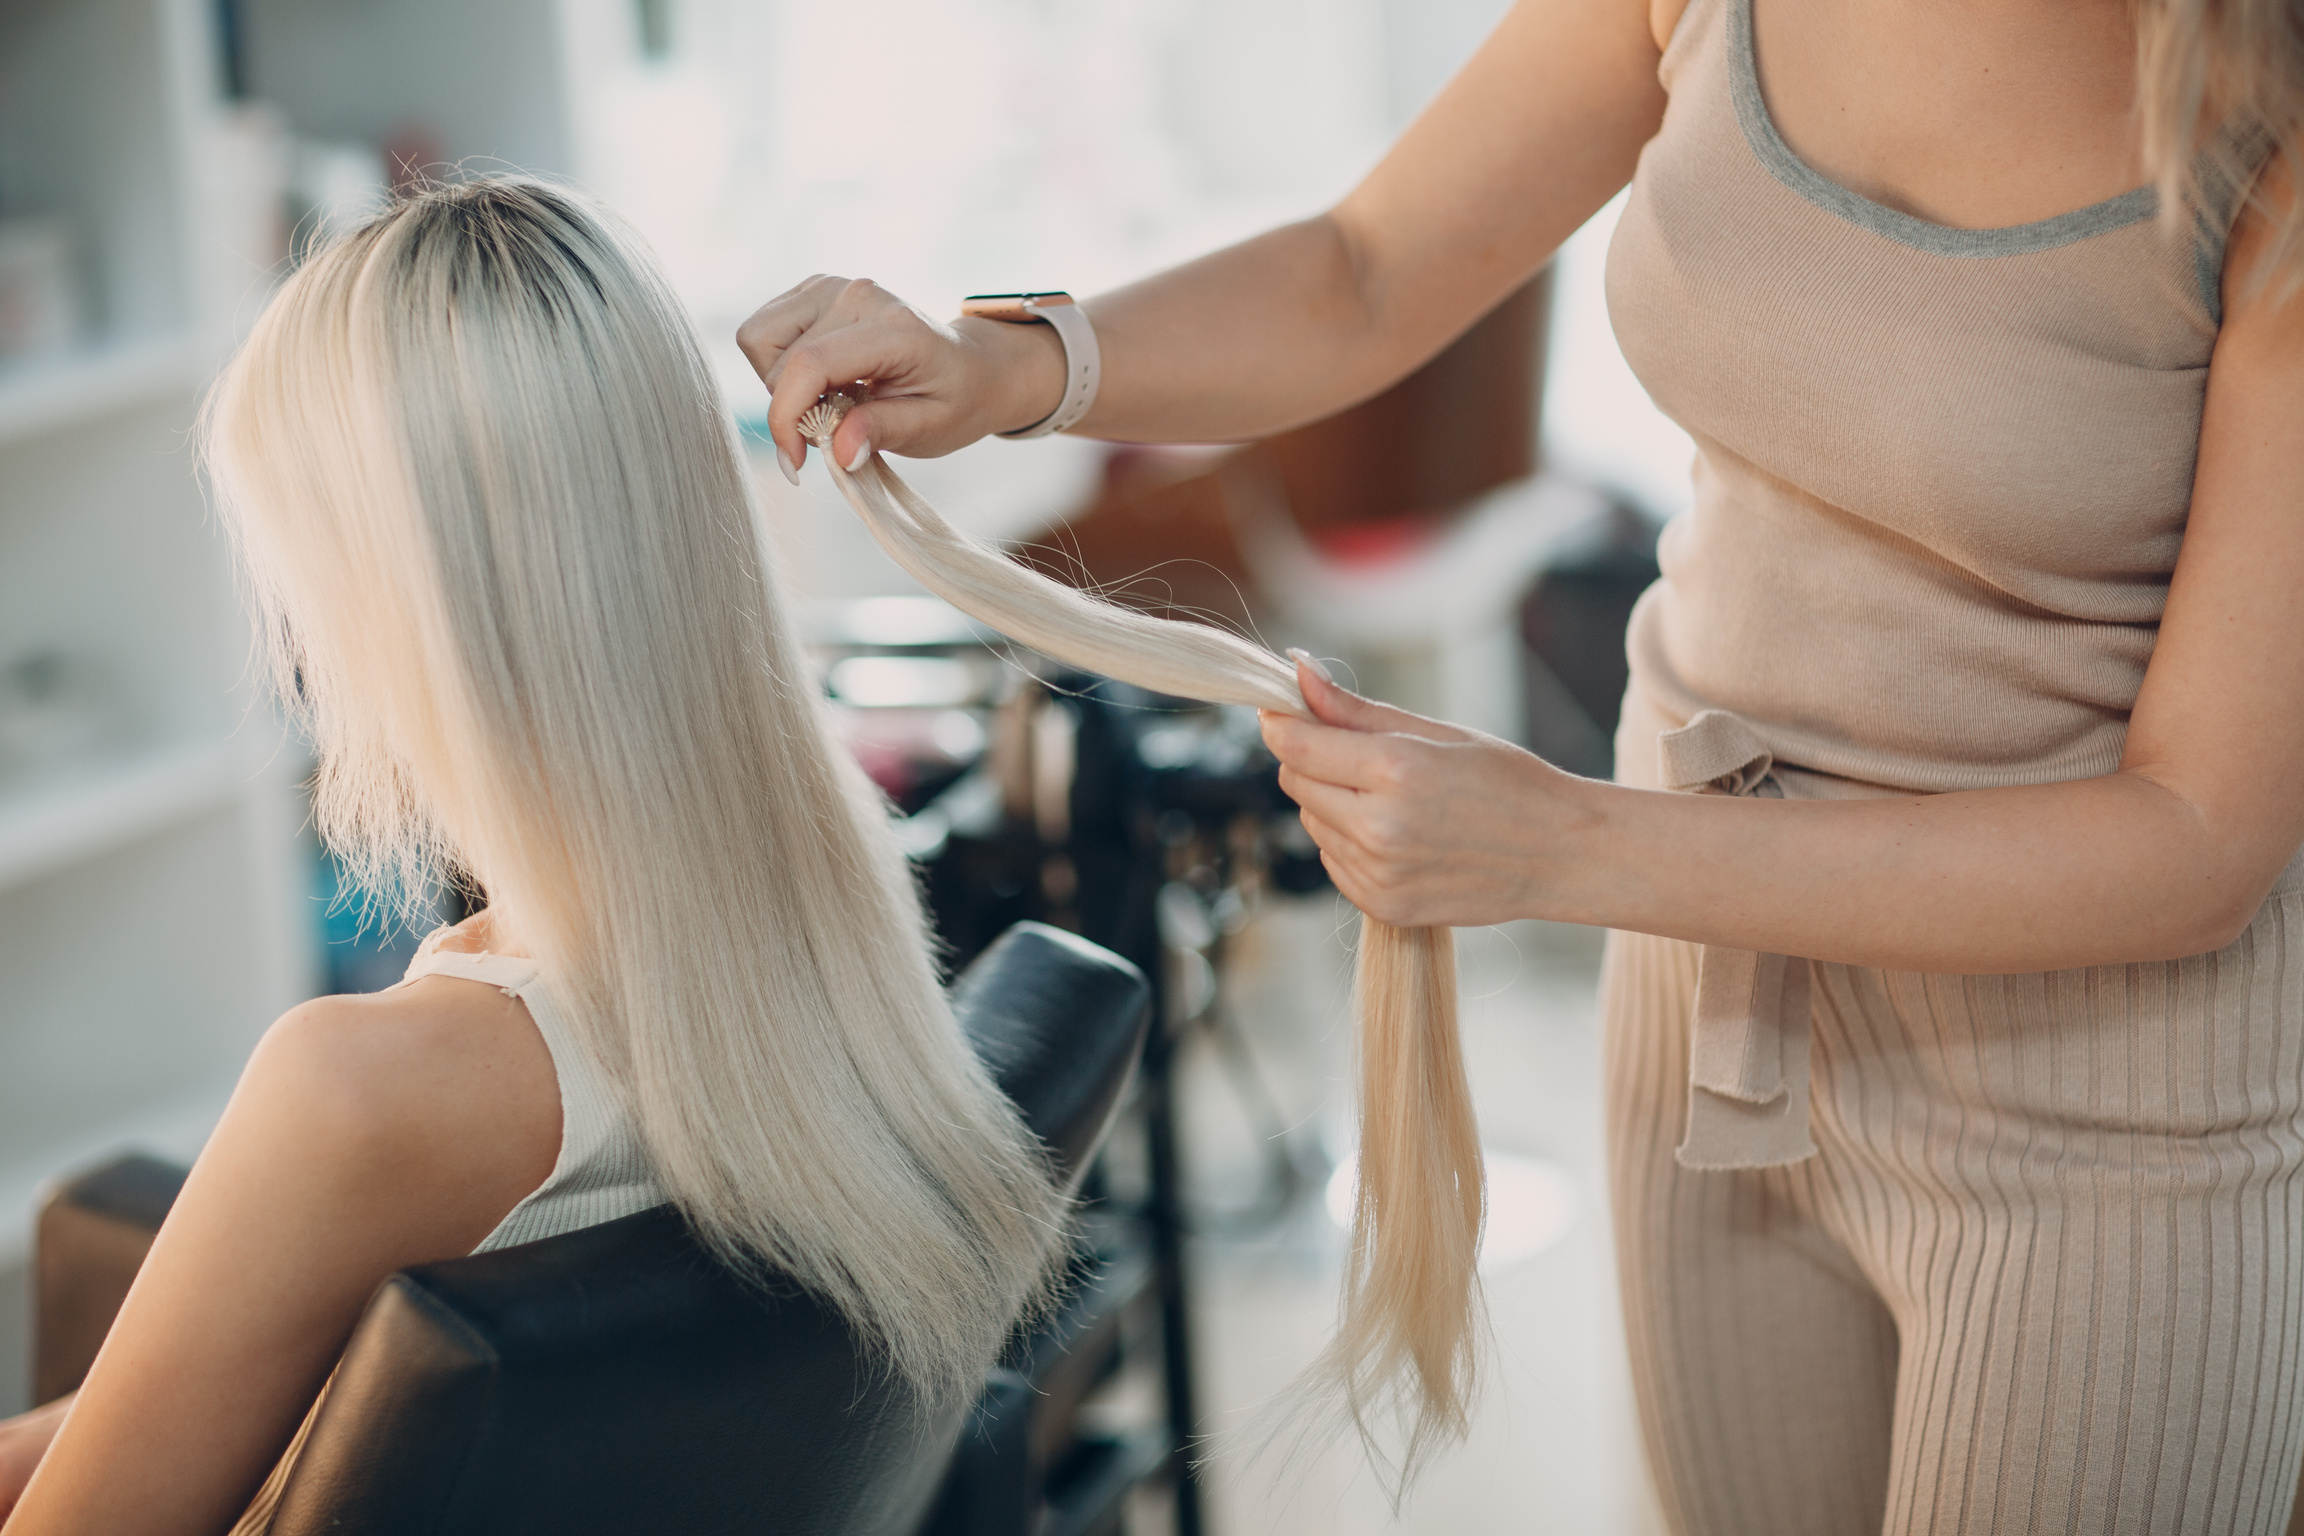 Hairdresser Female Making Hair Extensions to Young Woman with Blonde Hair in Beauty Salon. Professional Hair Extension.